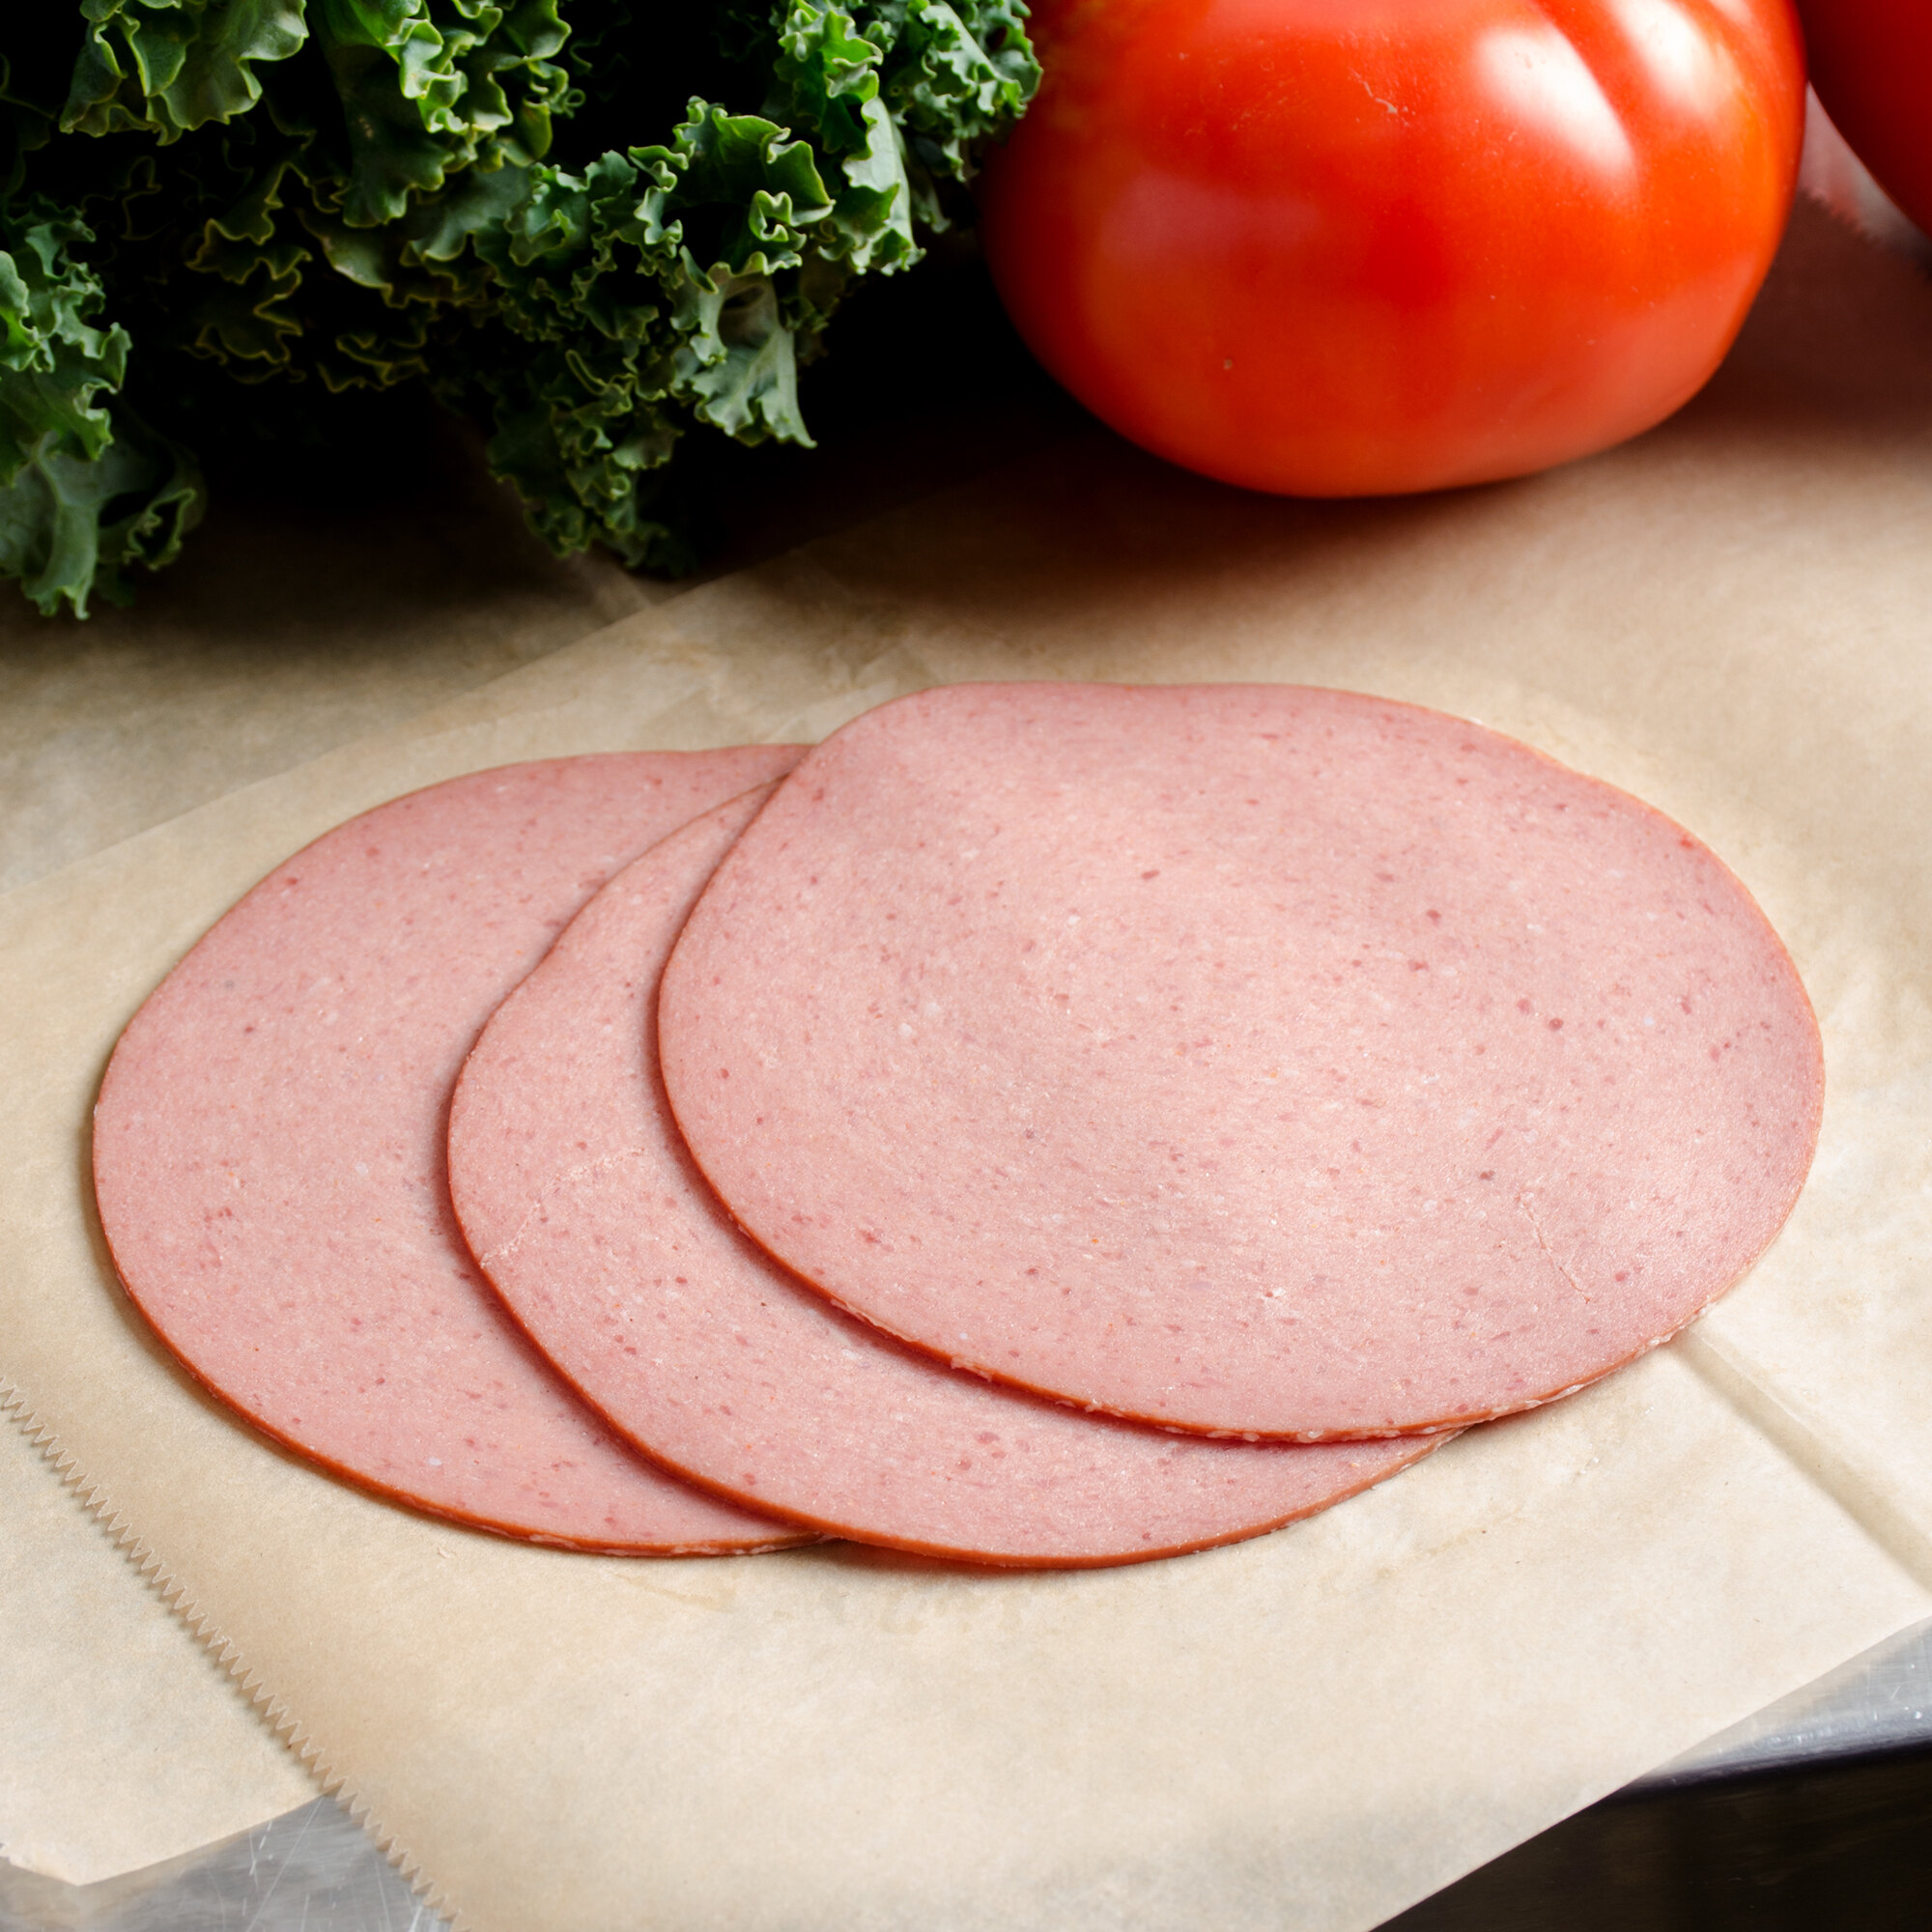 Hatfield Deli Choice 7 lb. Beef Bologna - 2/Case How To Order Deli Meat In Pounds